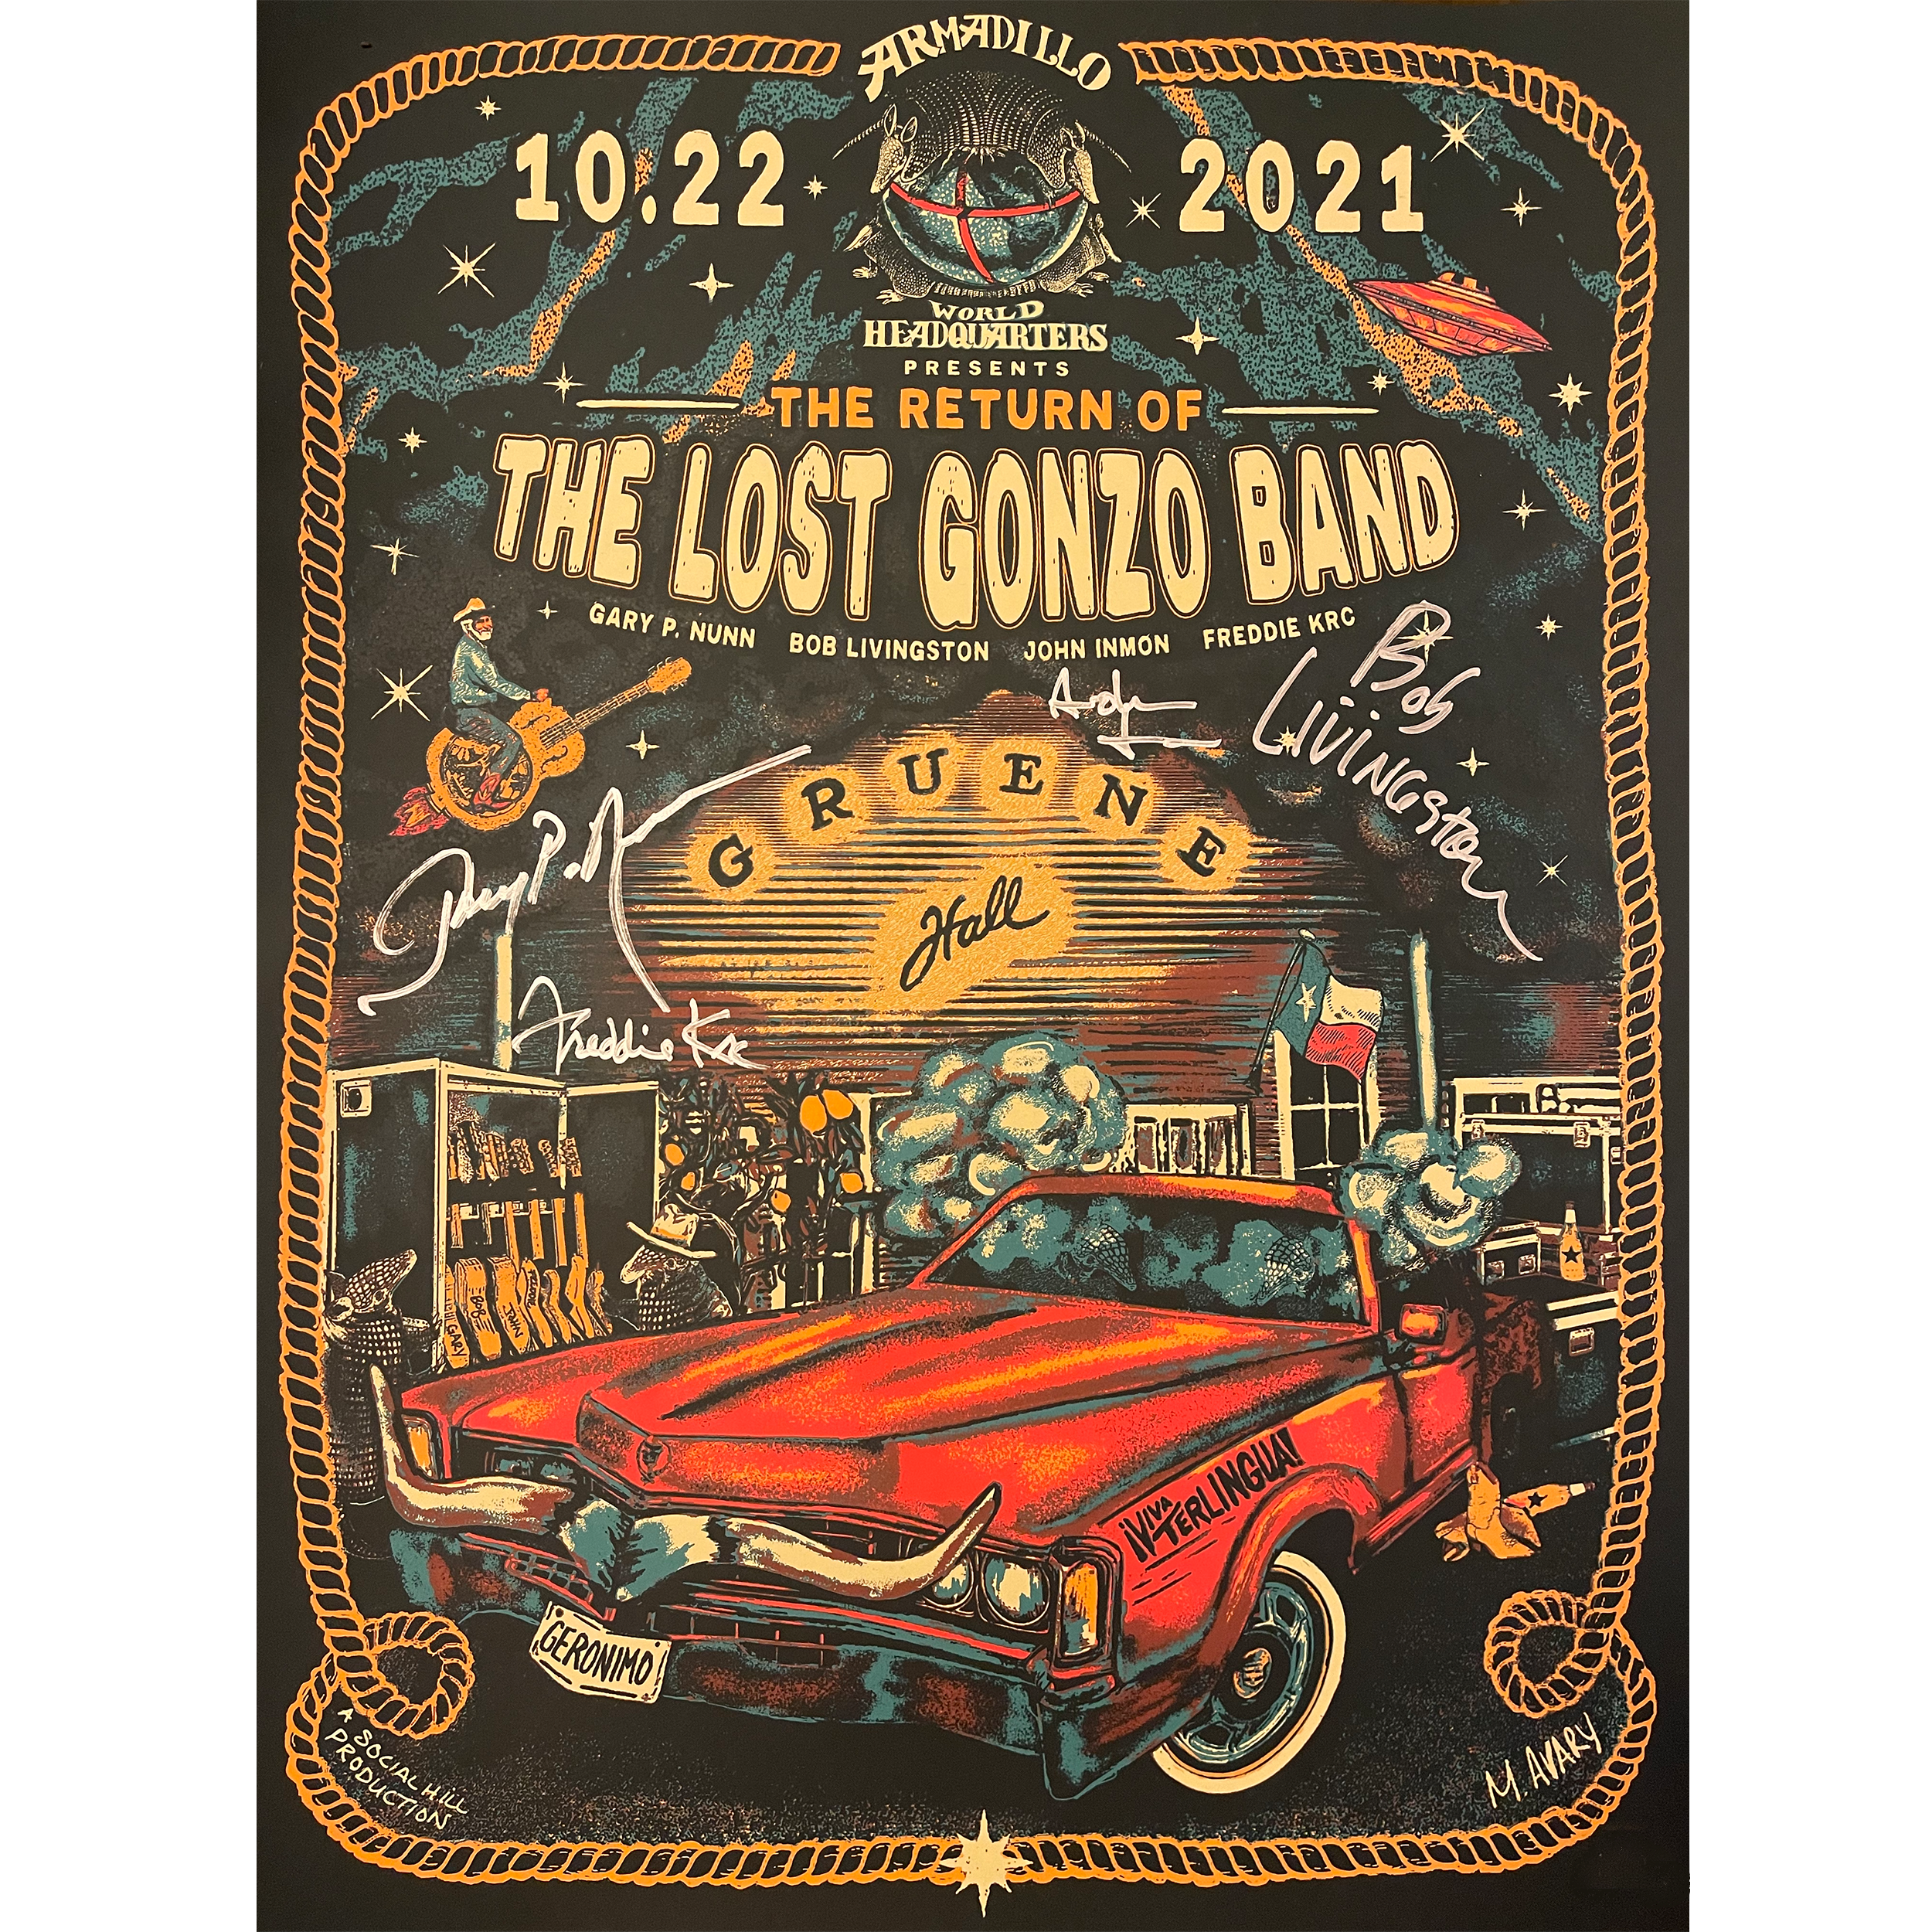 Gonzo Poster Gruene Hall - Avary.png